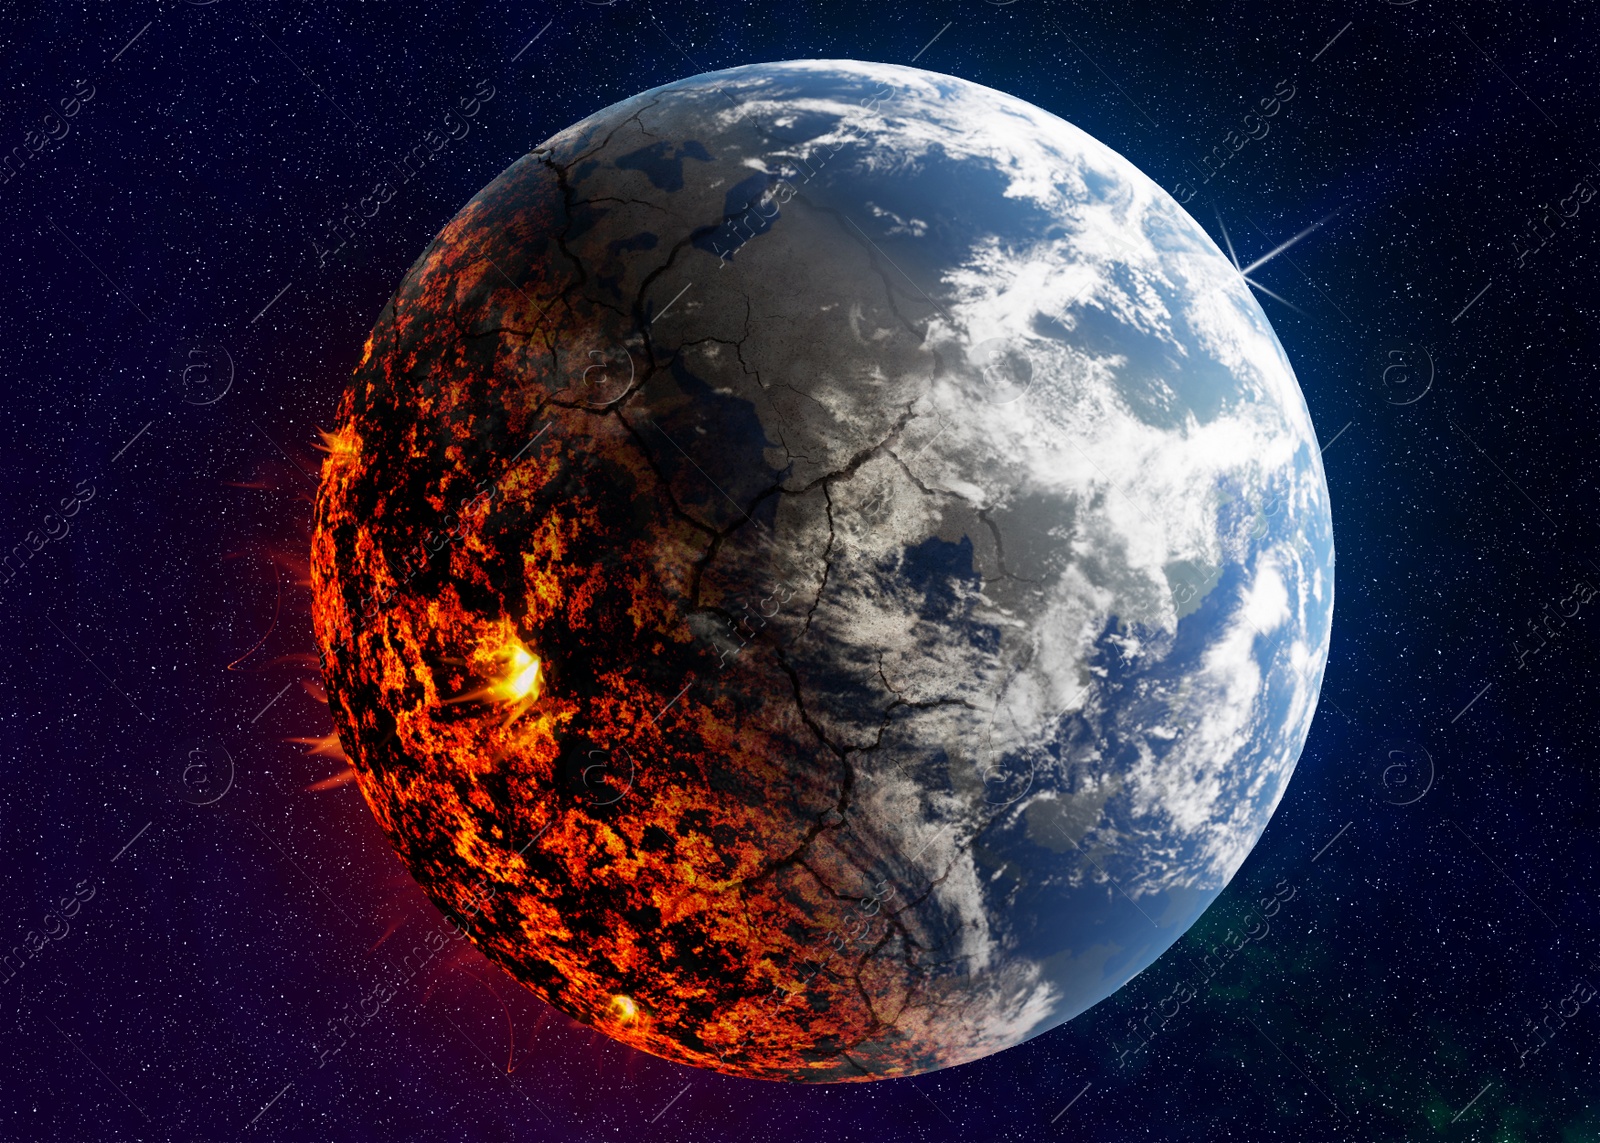 Illustration of Conceptual photo depicting Earth destroyed by global warming